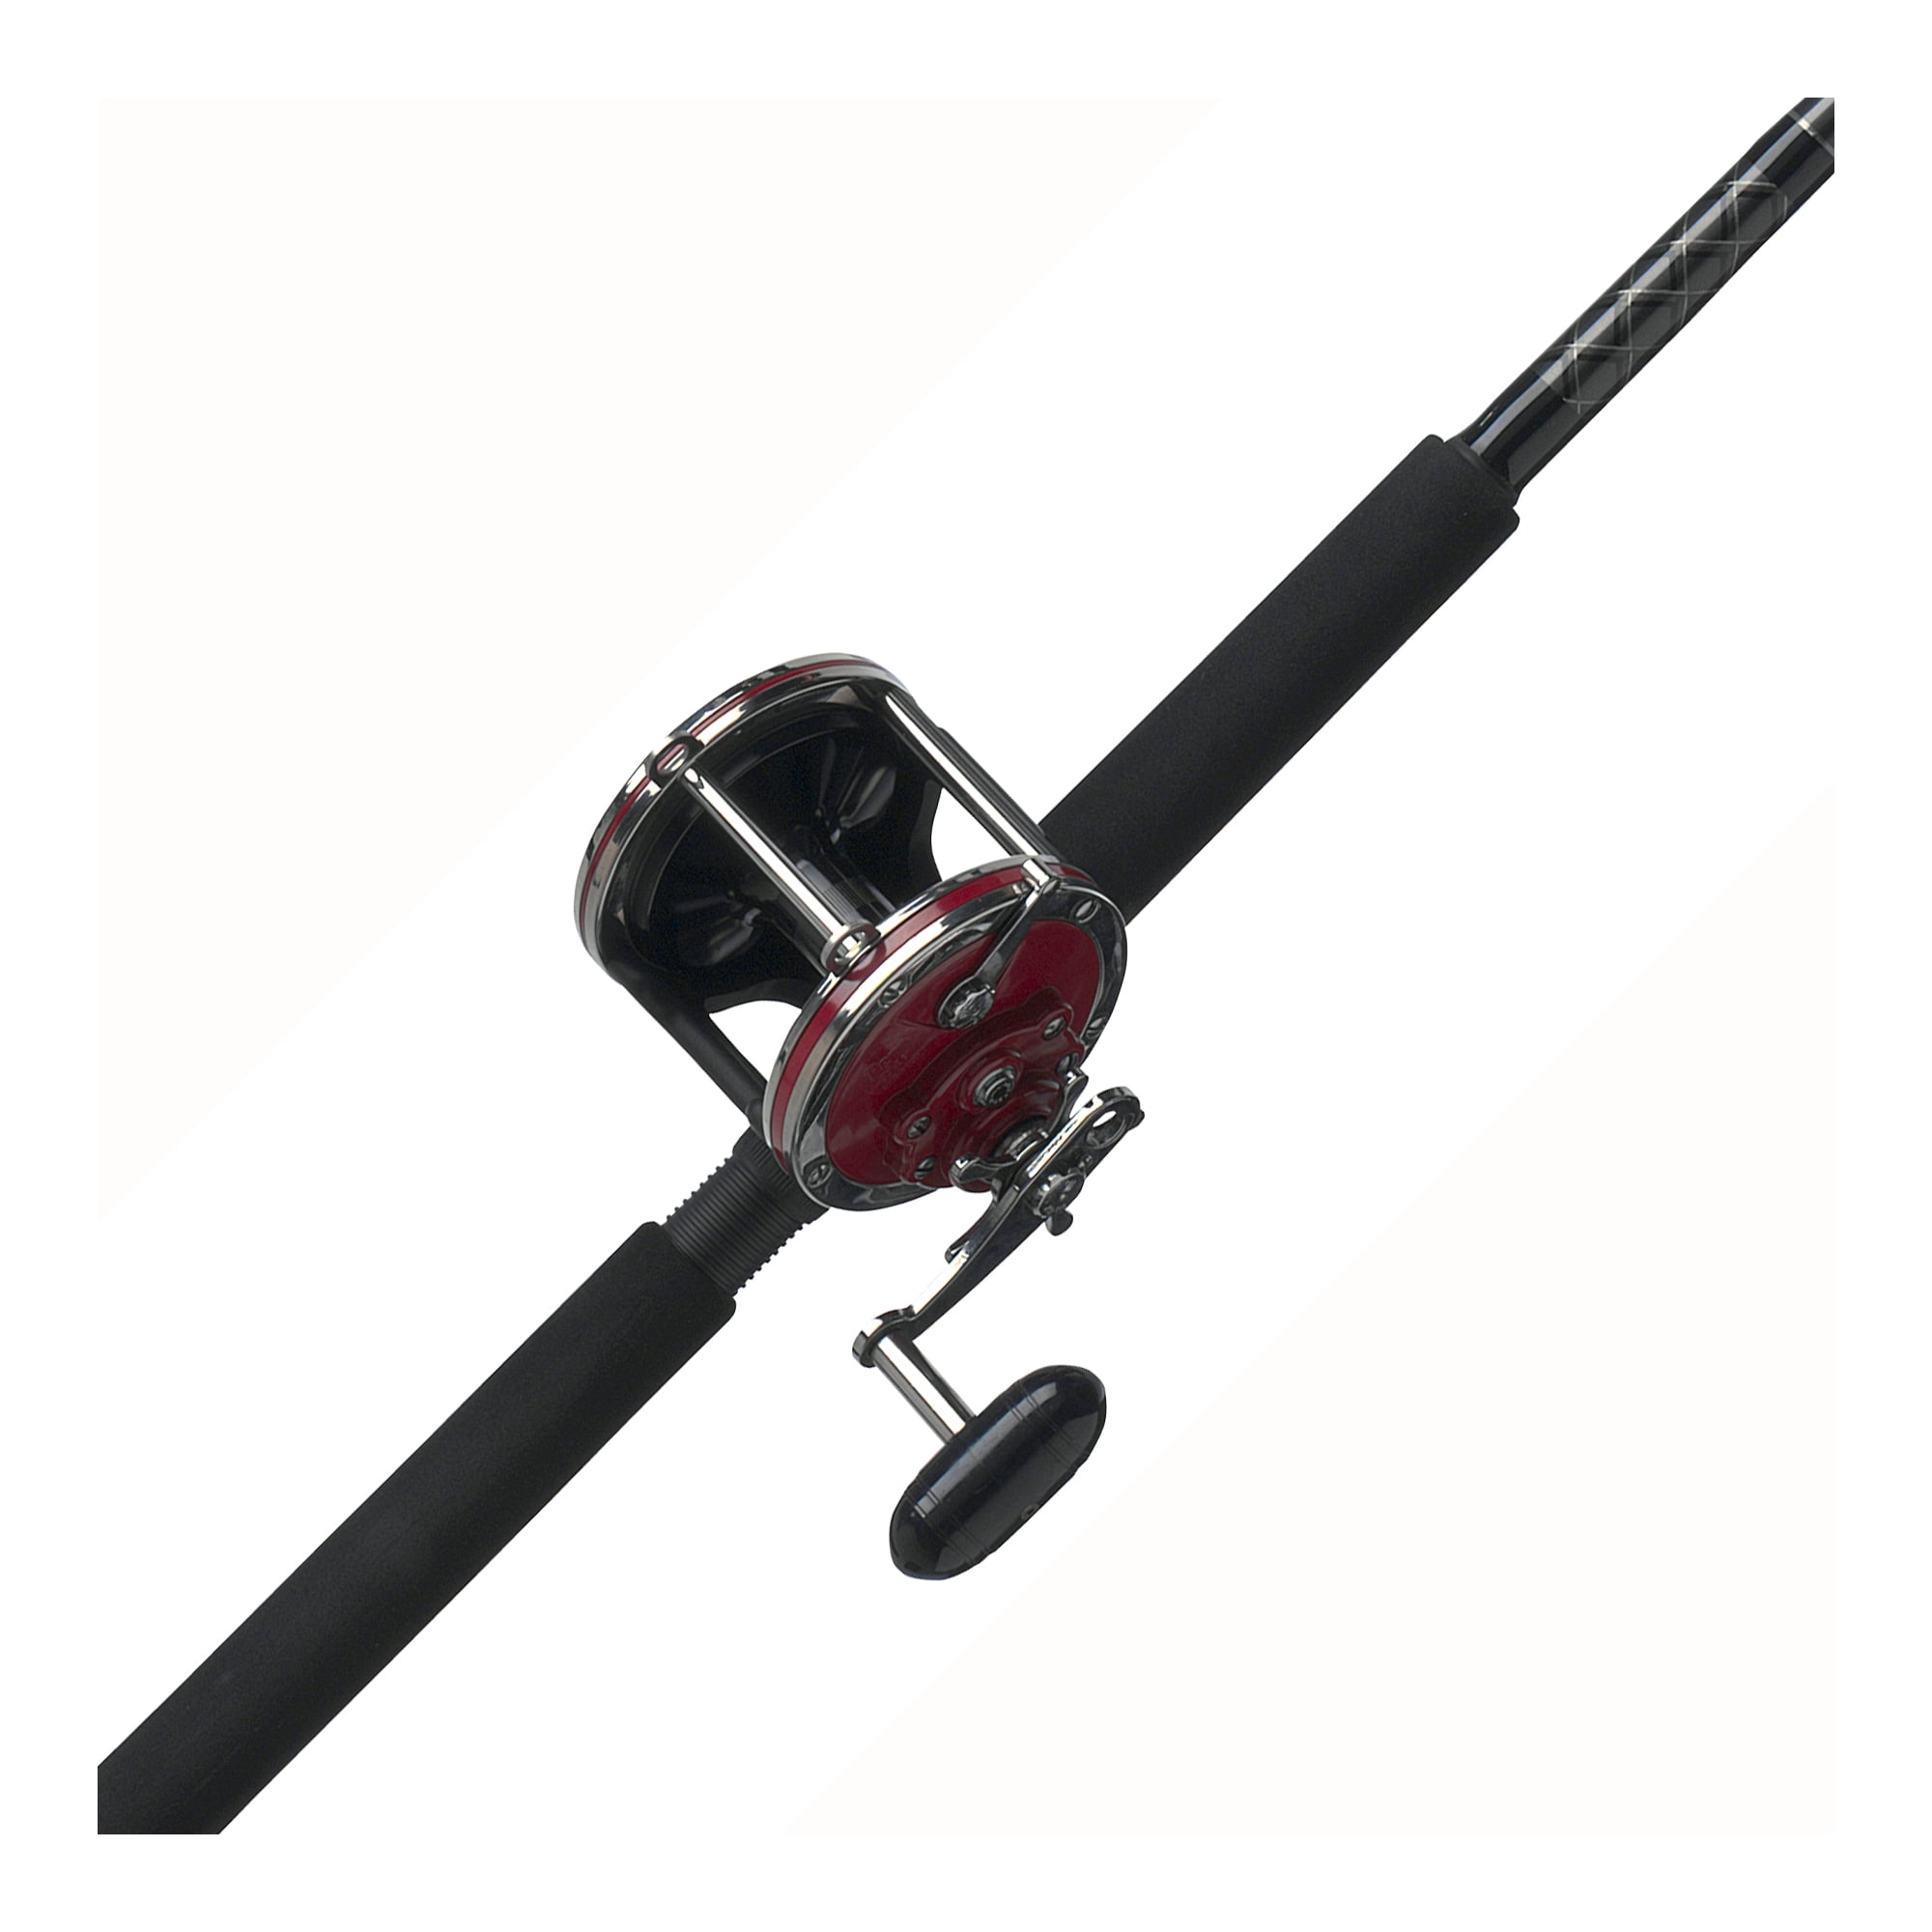 Penn Squall Fishing Rod 5'6" 1 Piece 15-24kg Overhead Rod NEW with Tags LAST ONE 